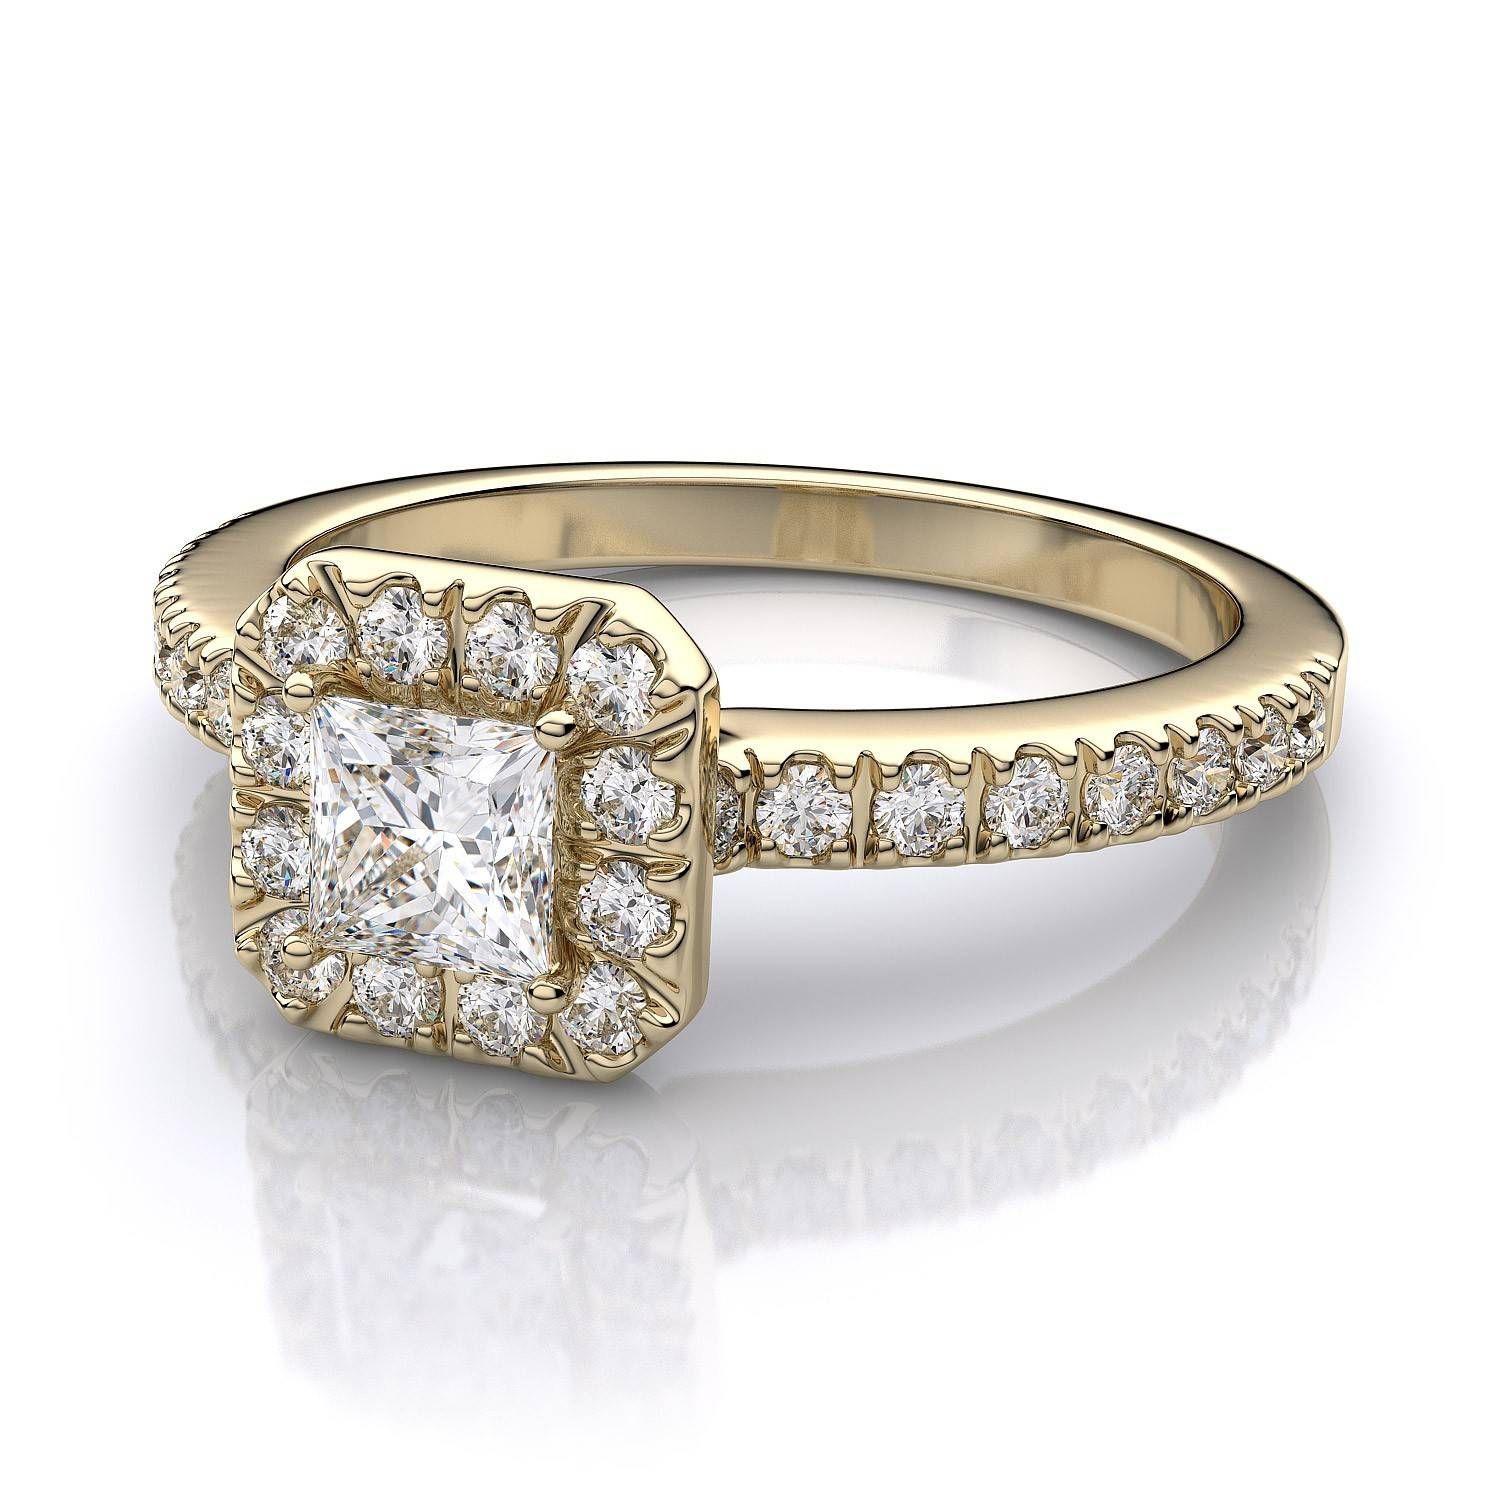 Buying Diamond Engagement Rings From Sylvie Collection With Regard To Embedded Diamond Engagement Rings (View 10 of 15)